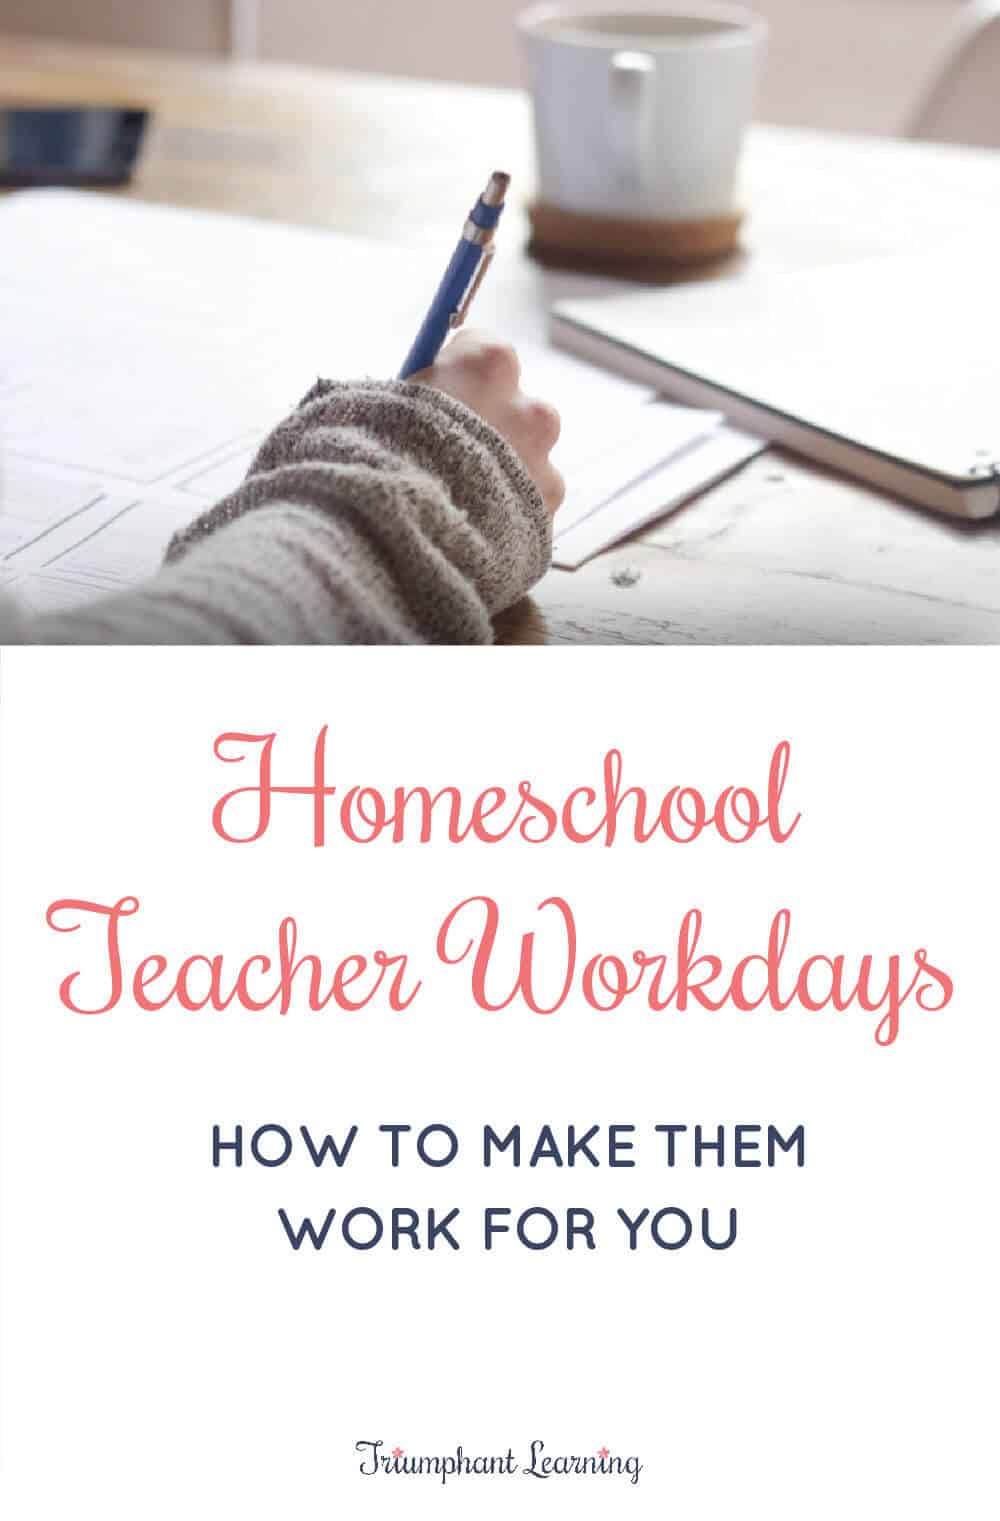 Homeschool teacher workdays can diminish your stress level. Learn what you need to know to take advantage of them in your homeschool. via @TriLearning